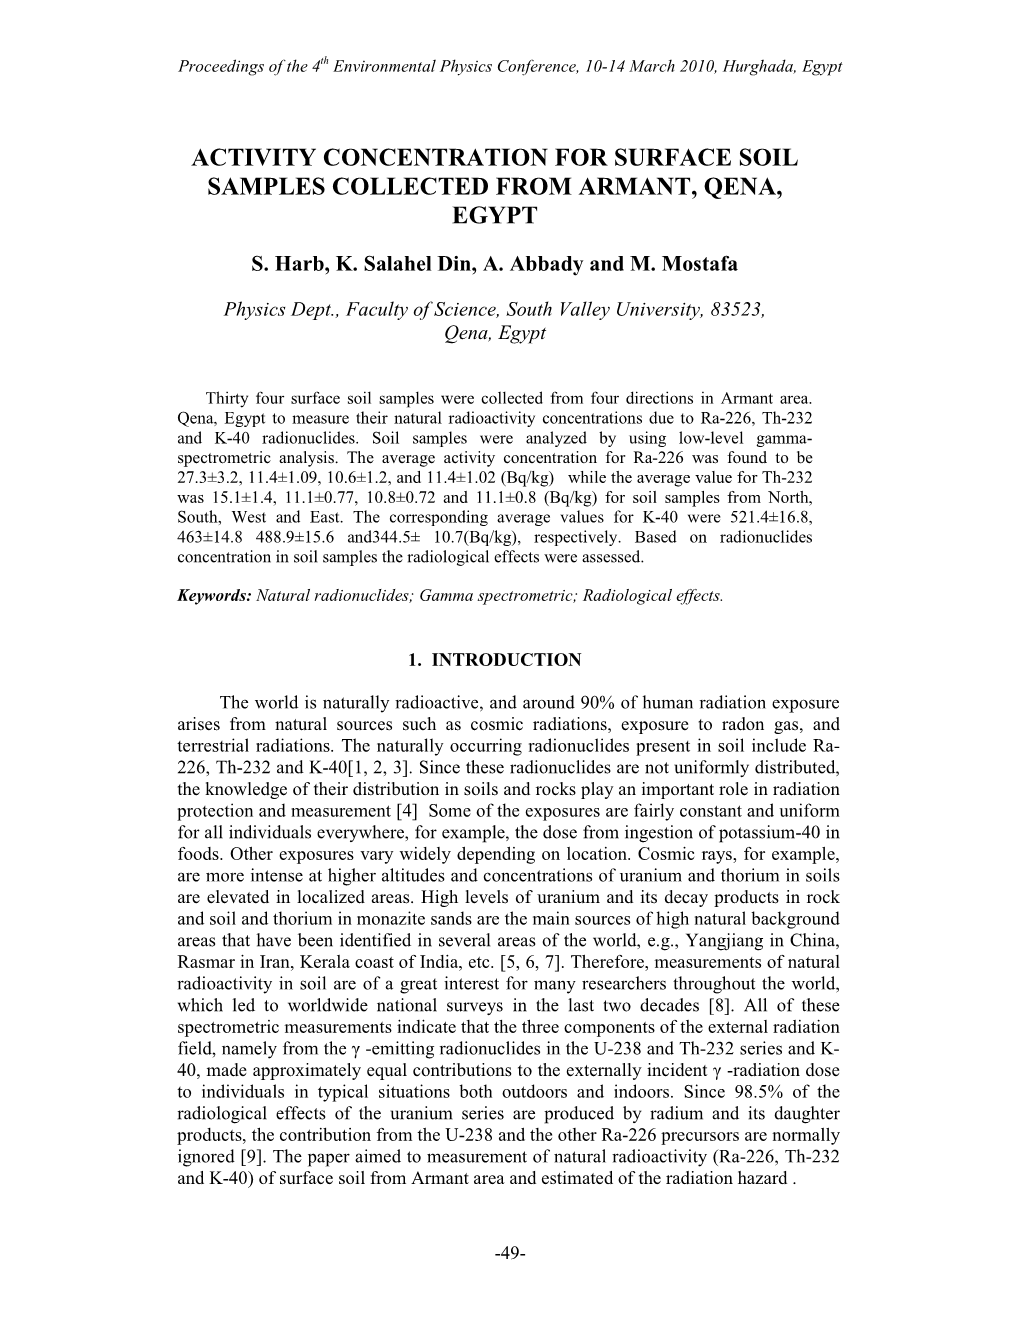 Activity Concentration for Surface Soil Samples Collected from Armant, Qena, Egypt